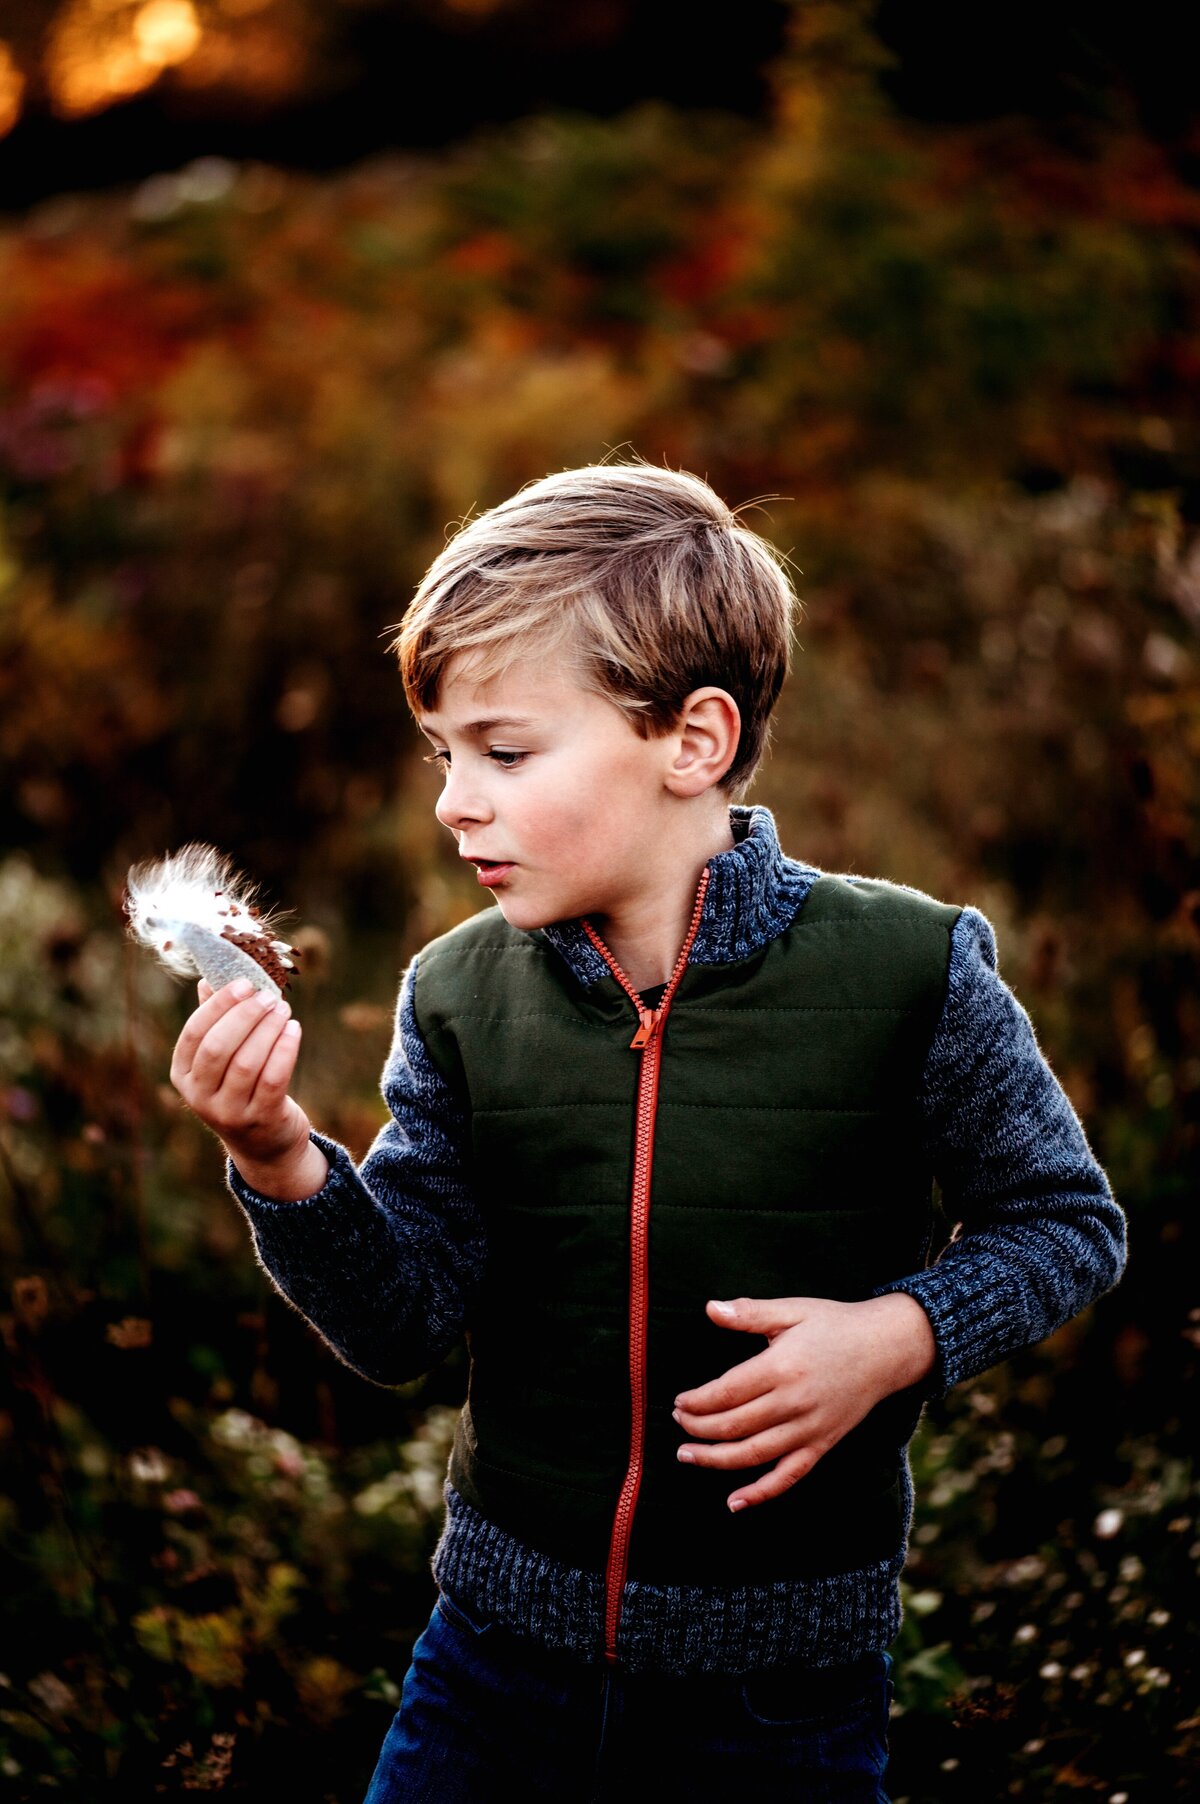 Child blowing milkweed McKennaPattersonPhotography